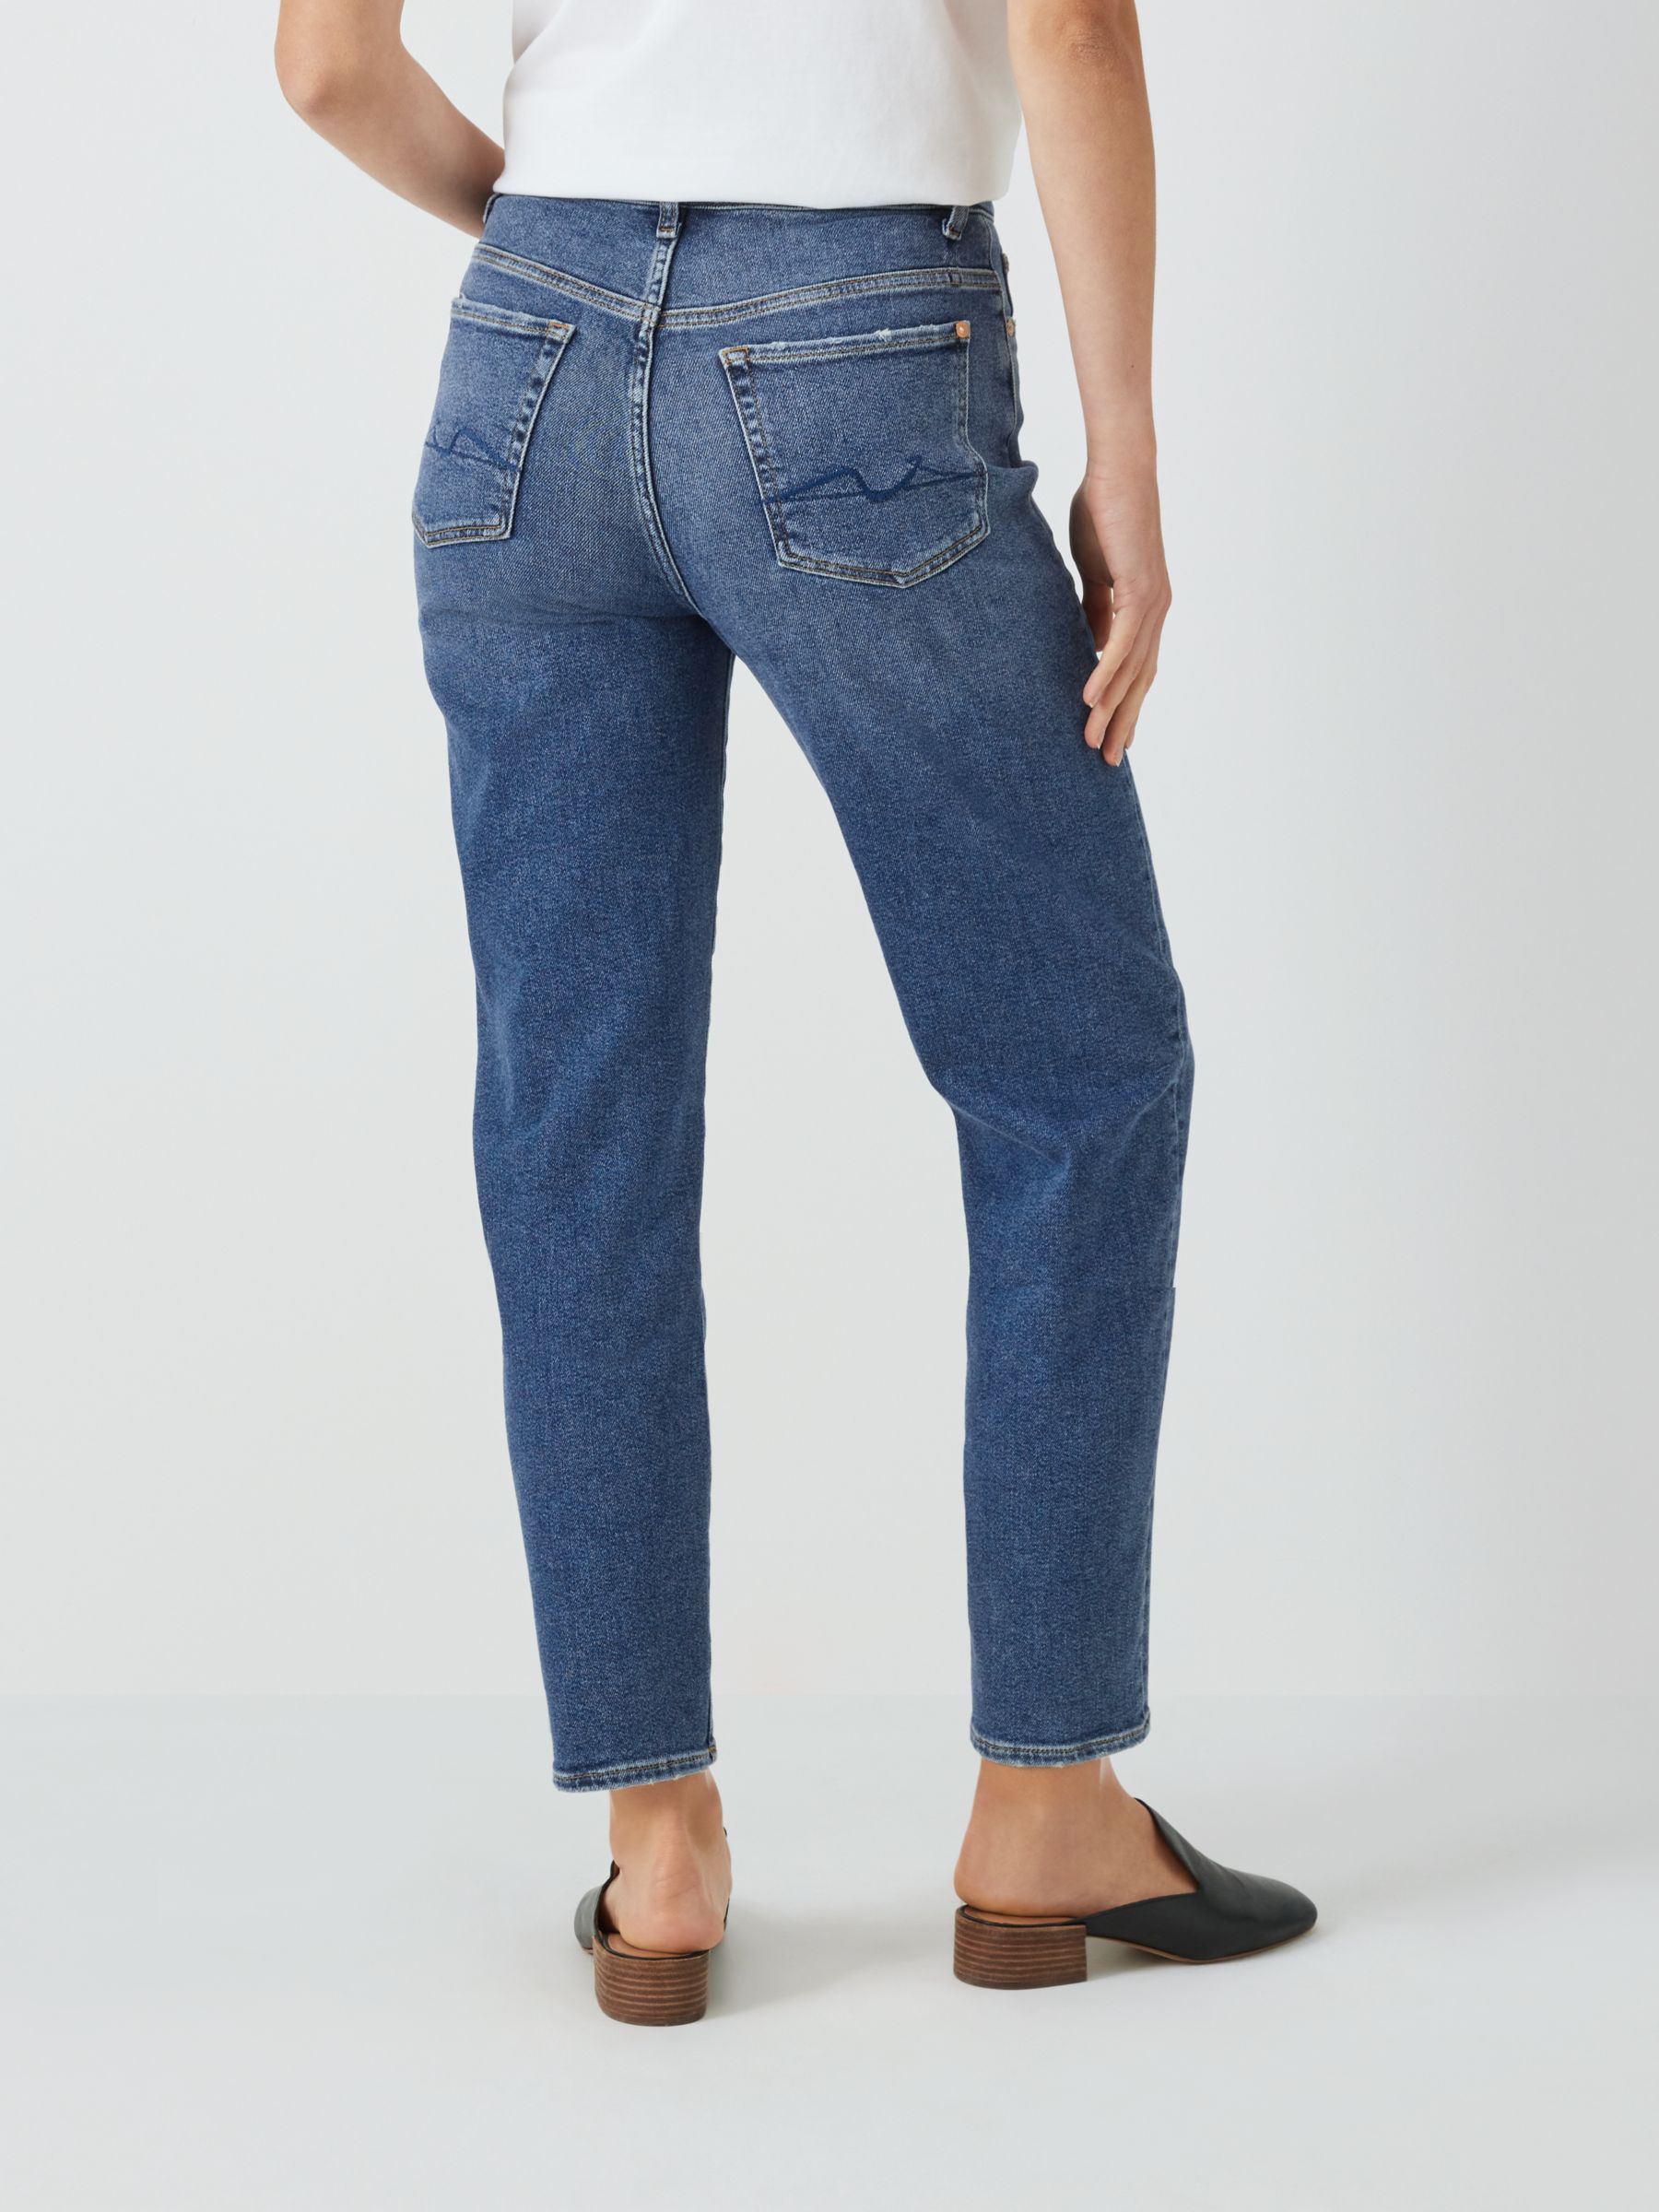 7 For All Mankind Malia Luxe Vintage Cropped Mom Jeans, Dark Blue, 26